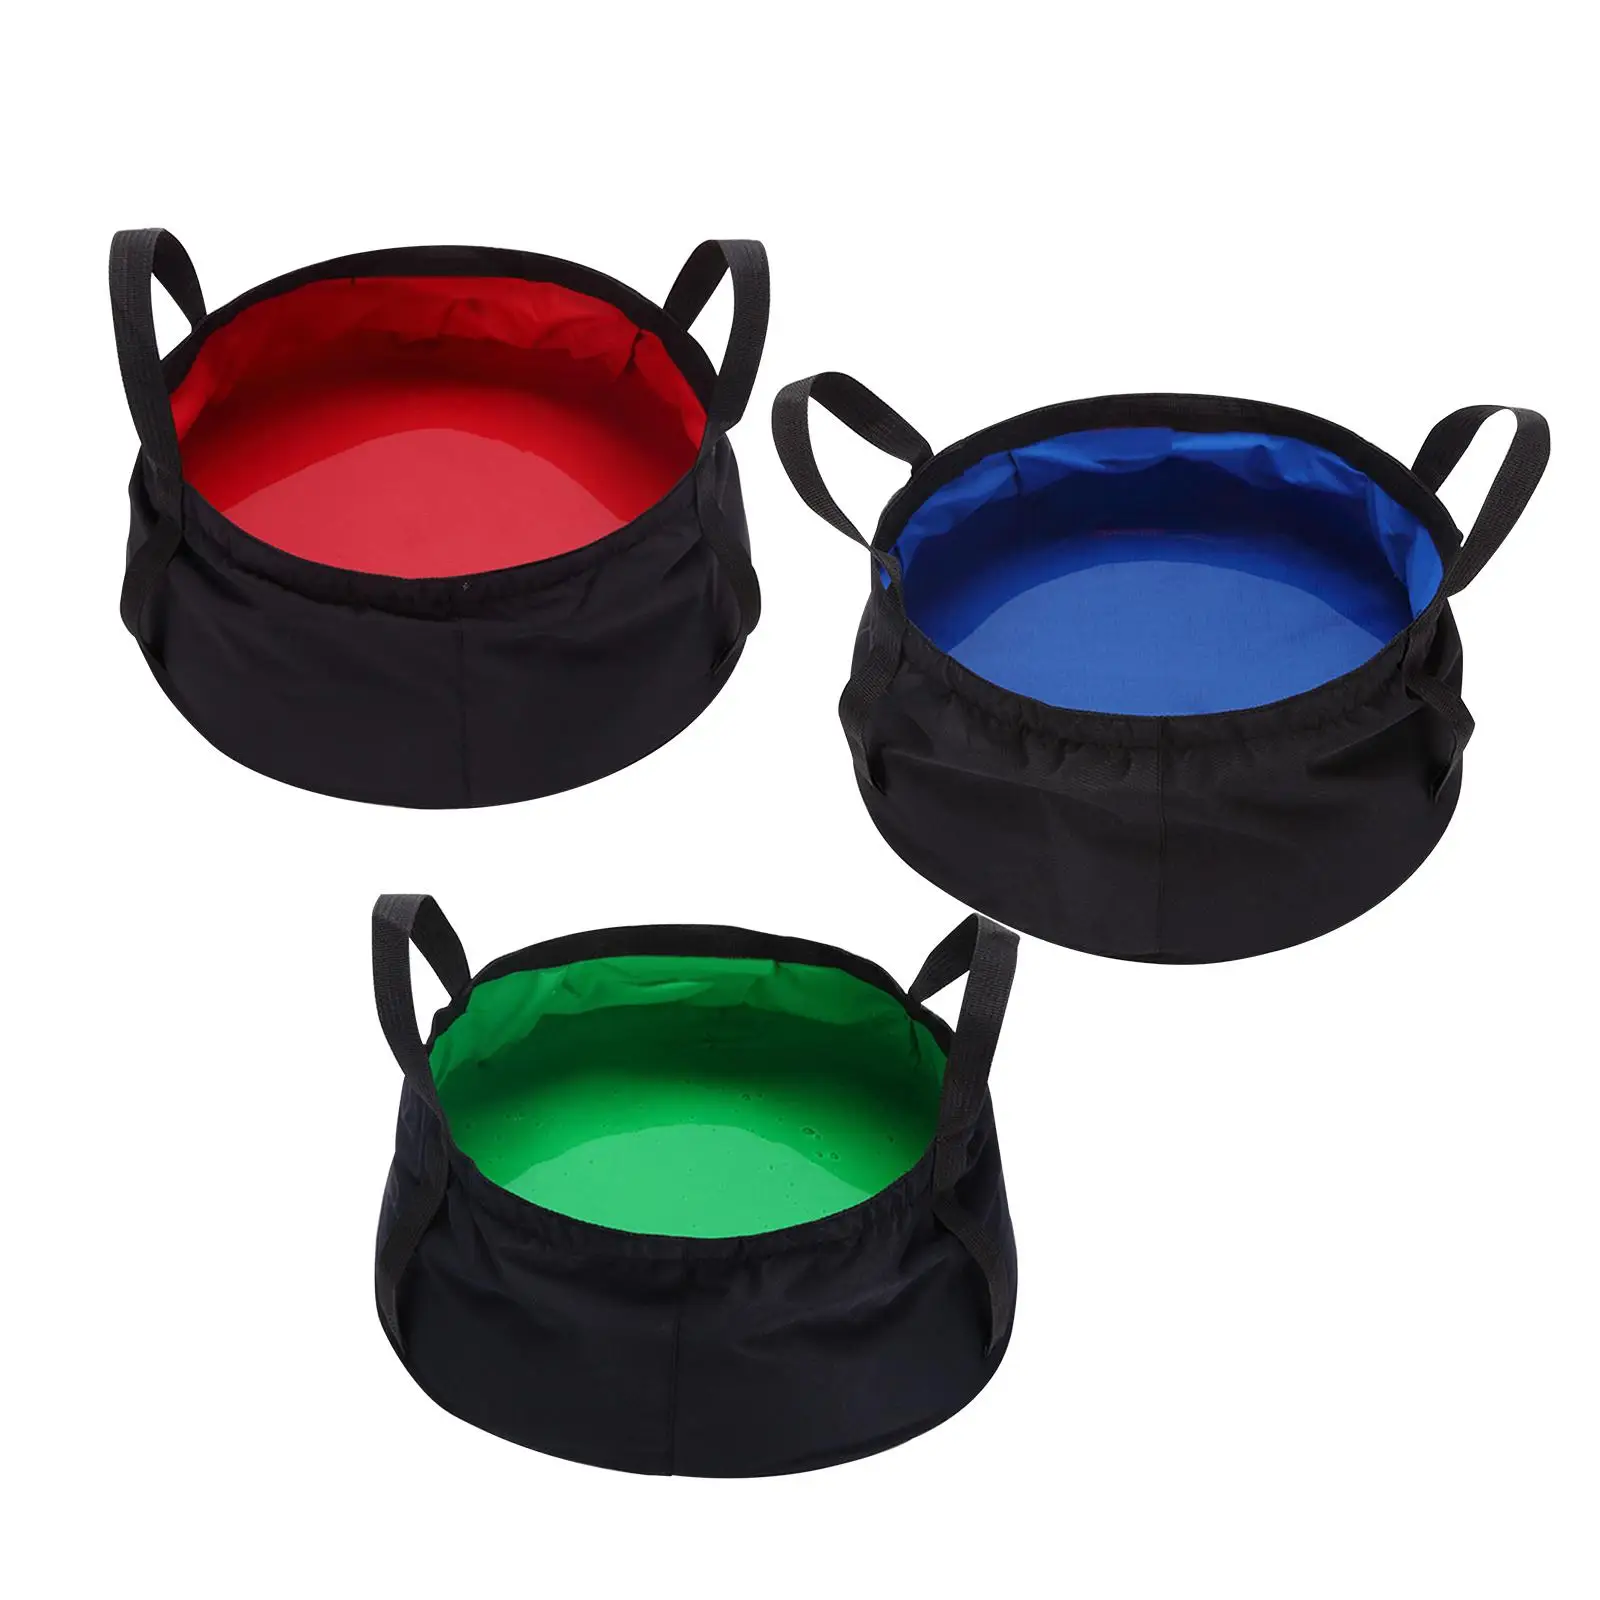 Collapsible Bucket Foldable Camping with carry Hiking Wash Basin Hiking